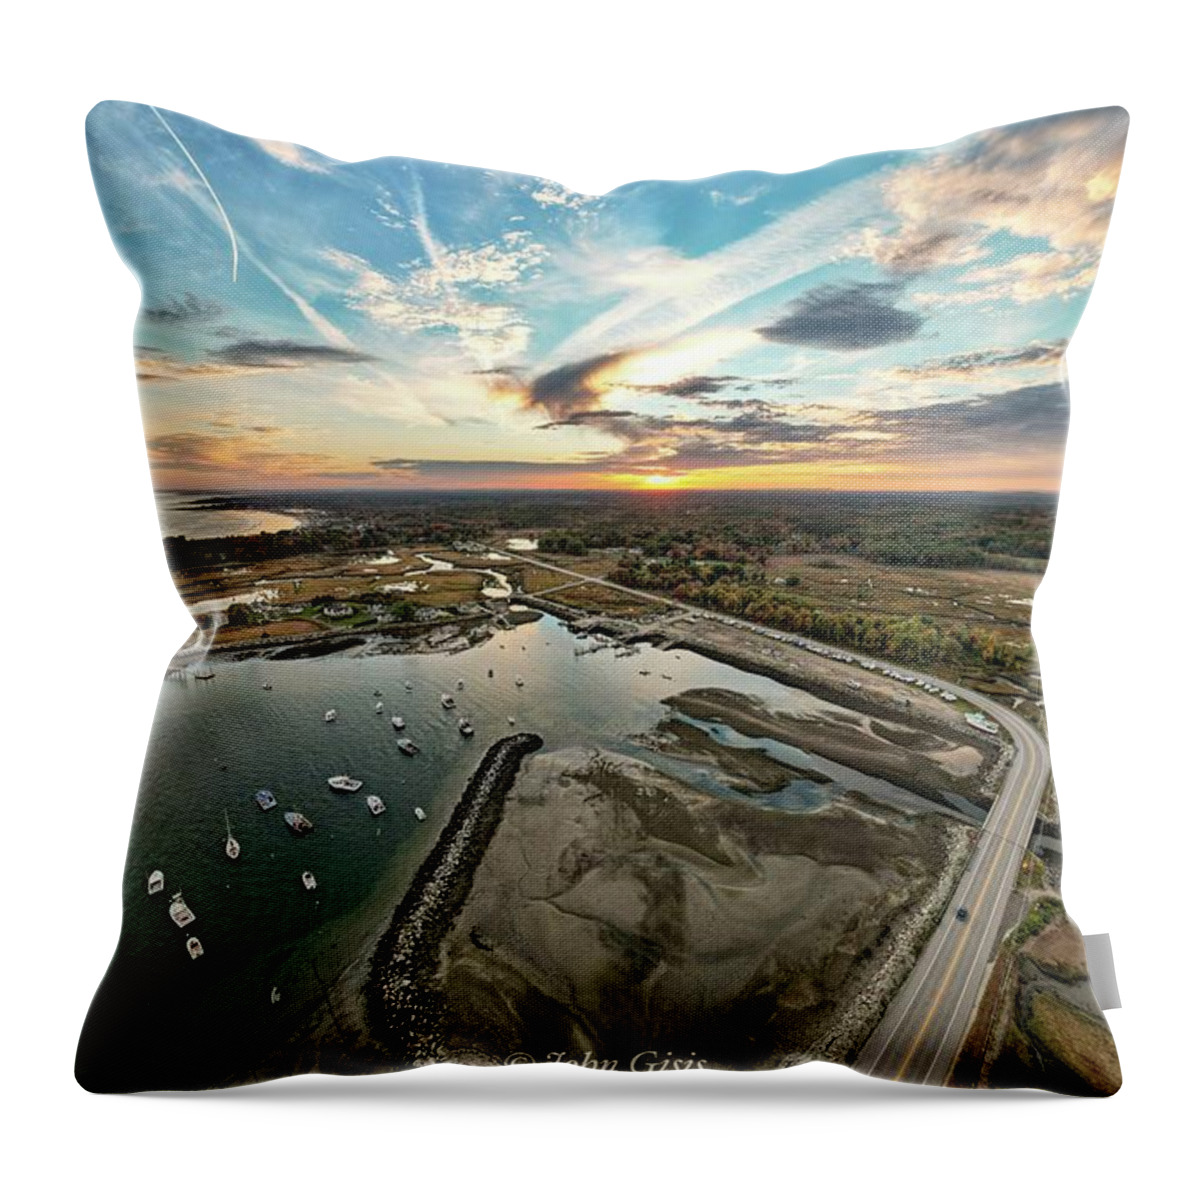  Throw Pillow featuring the photograph Rye Harbor by John Gisis